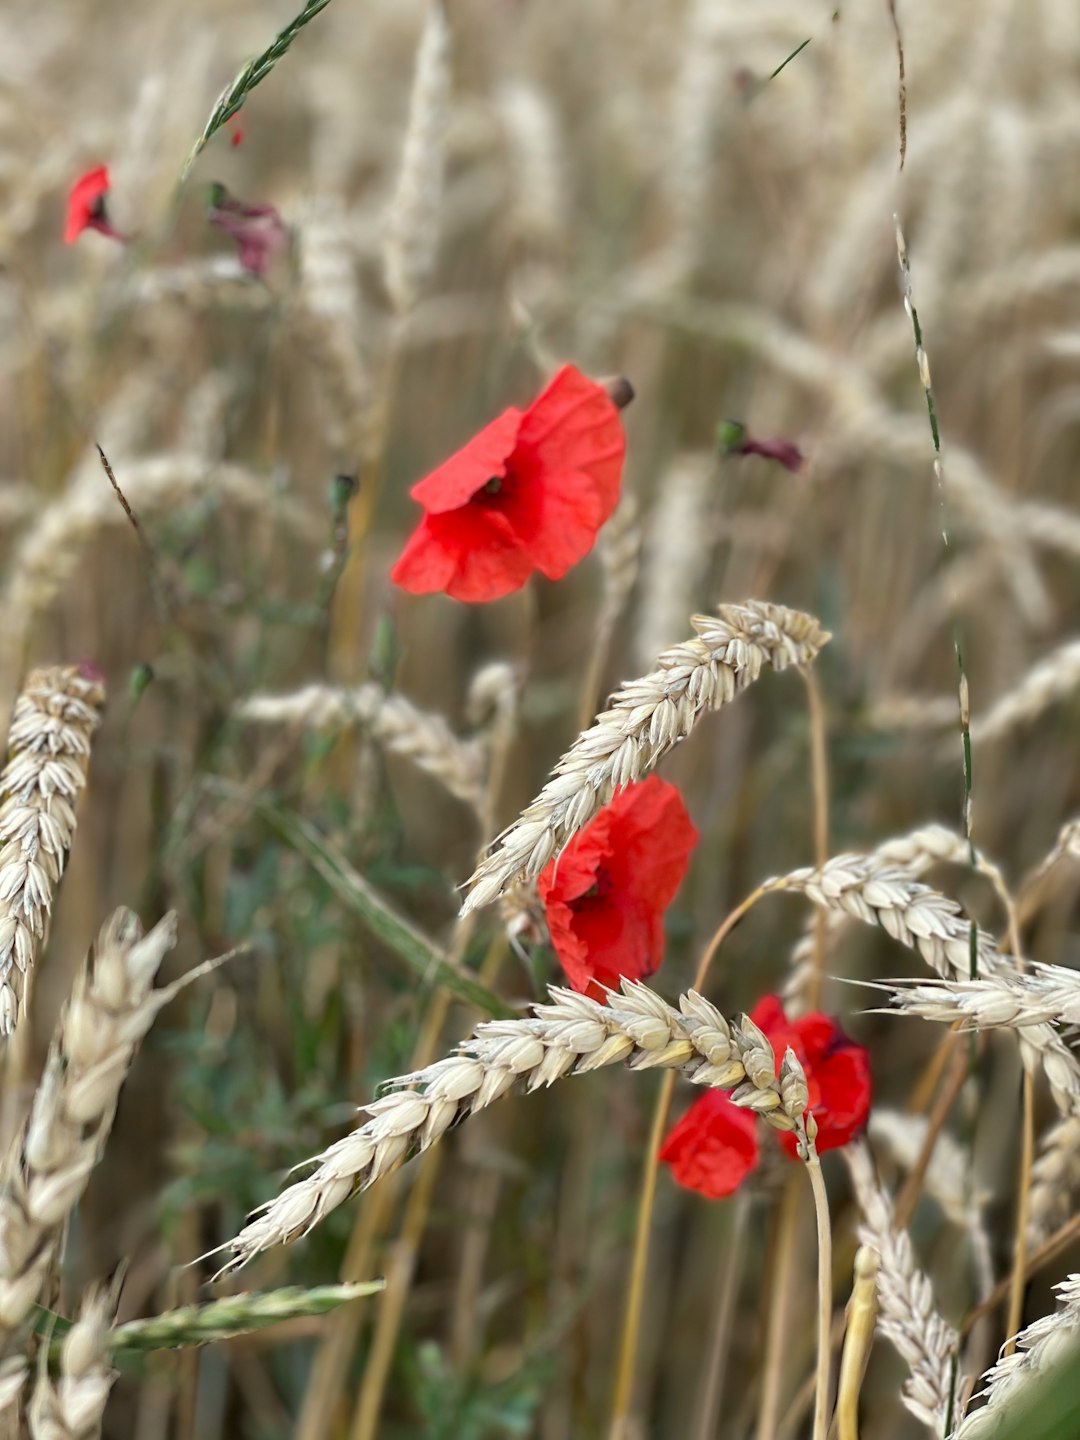 red flower on brown wheat field